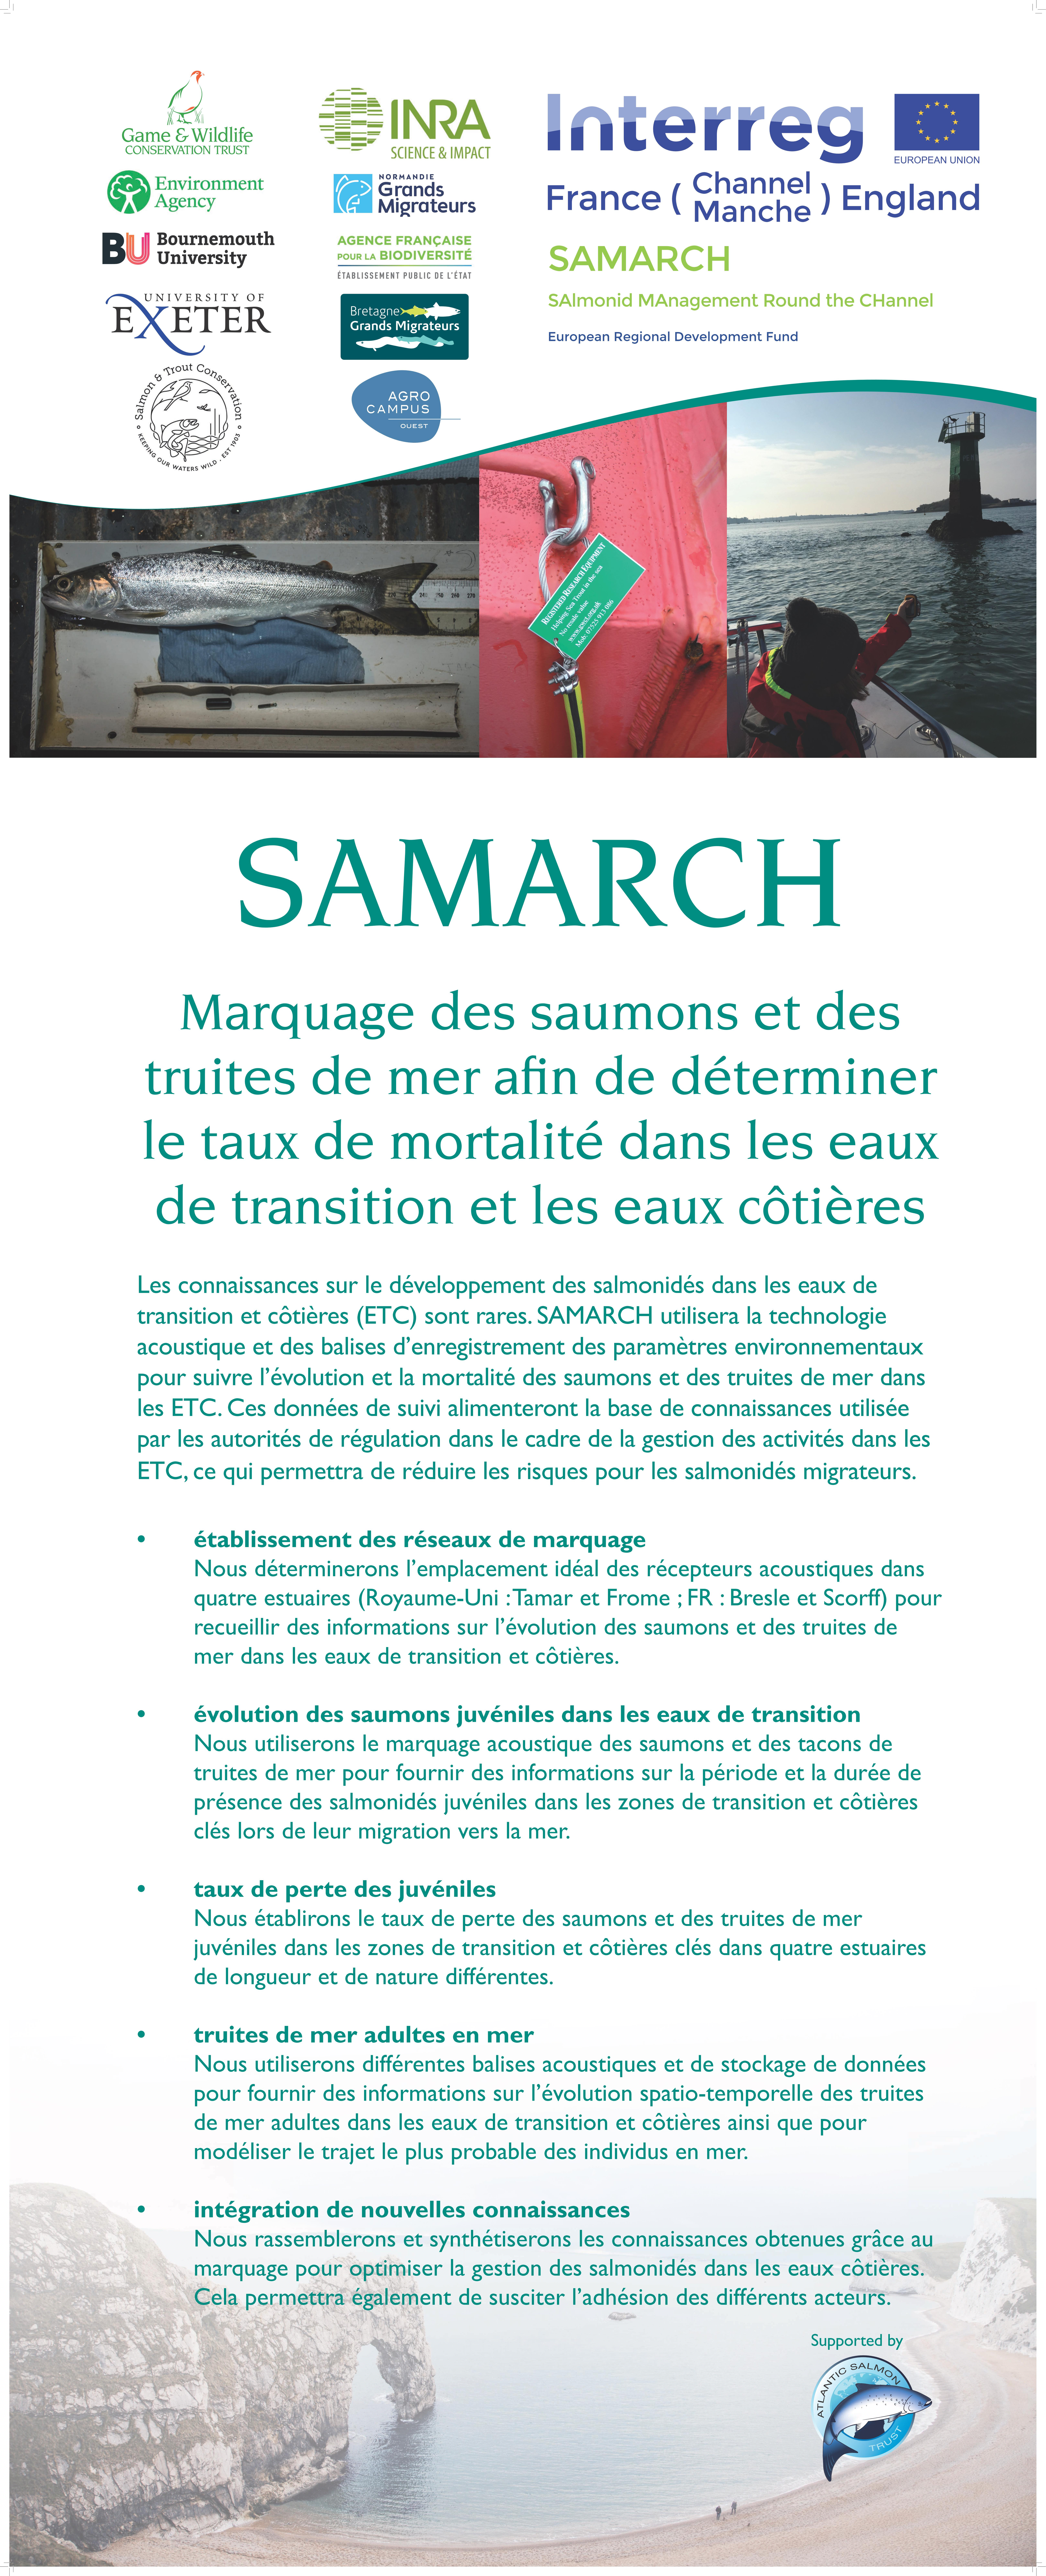 SAMARCH Banners French Nov 2017 Page 3